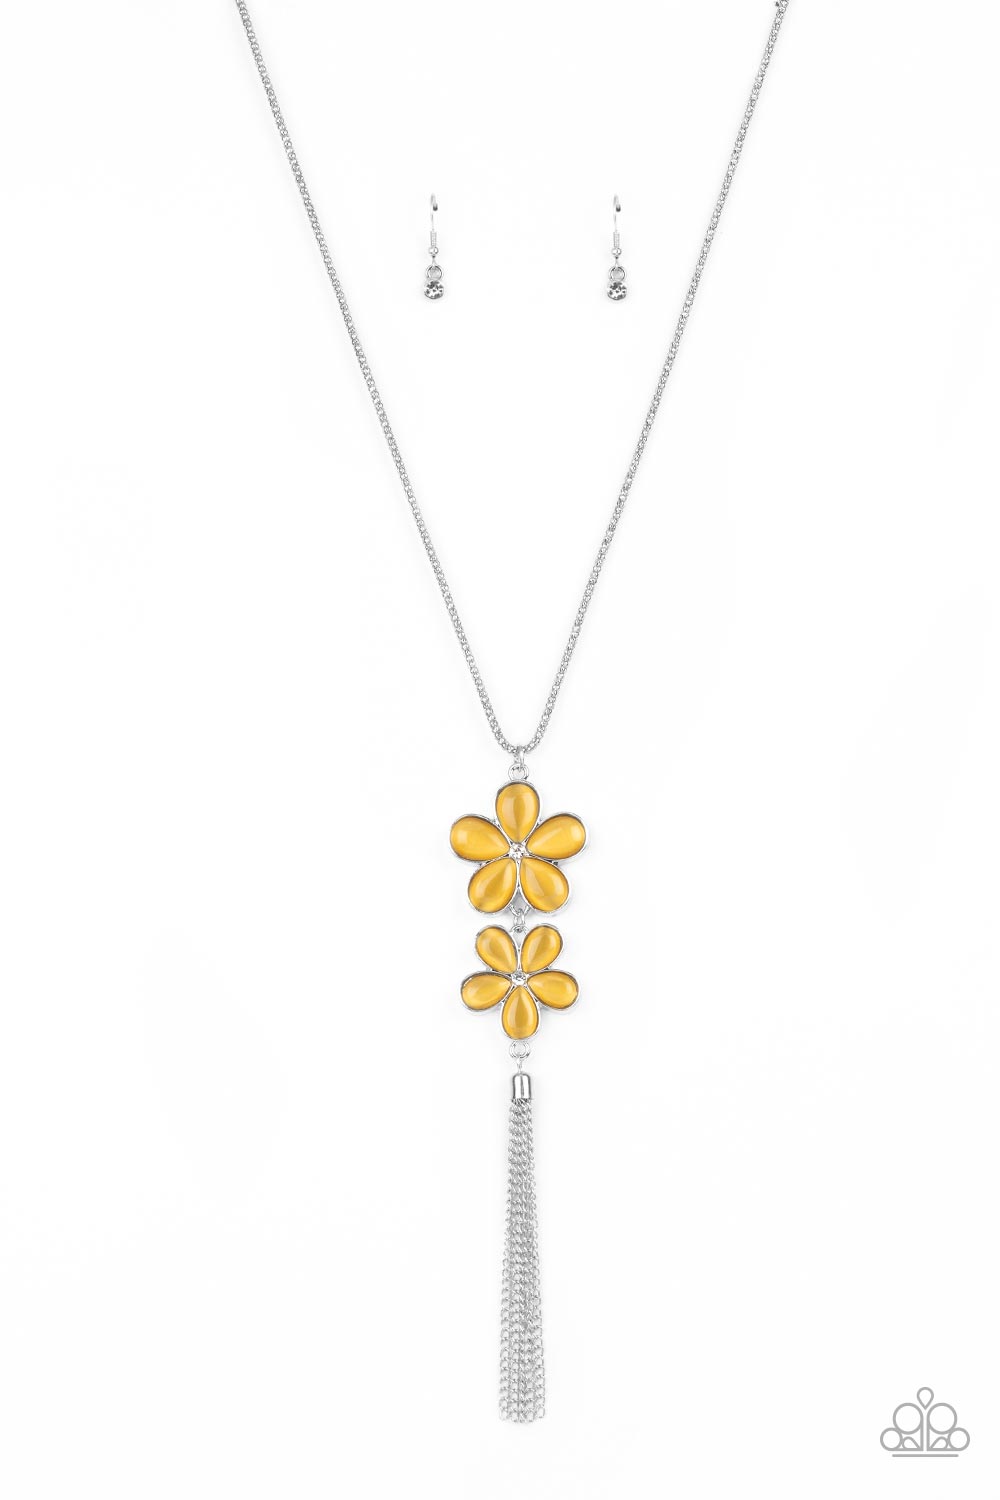 Perennial Powerhouse - Yellow Item #P2WH-YWXX-269XX Dotted with dainty white rhinestone centers, a pair of yellow cat's eye petaled flowers swing from the bottom of an extended silver popcorn chain. A silver chain tassel swings from the bottom of the enchanting display, adding playful movement to the floral centerpiece. Features an adjustable clasp closure.  Sold as one individual necklace. Includes one pair of matching earrings.